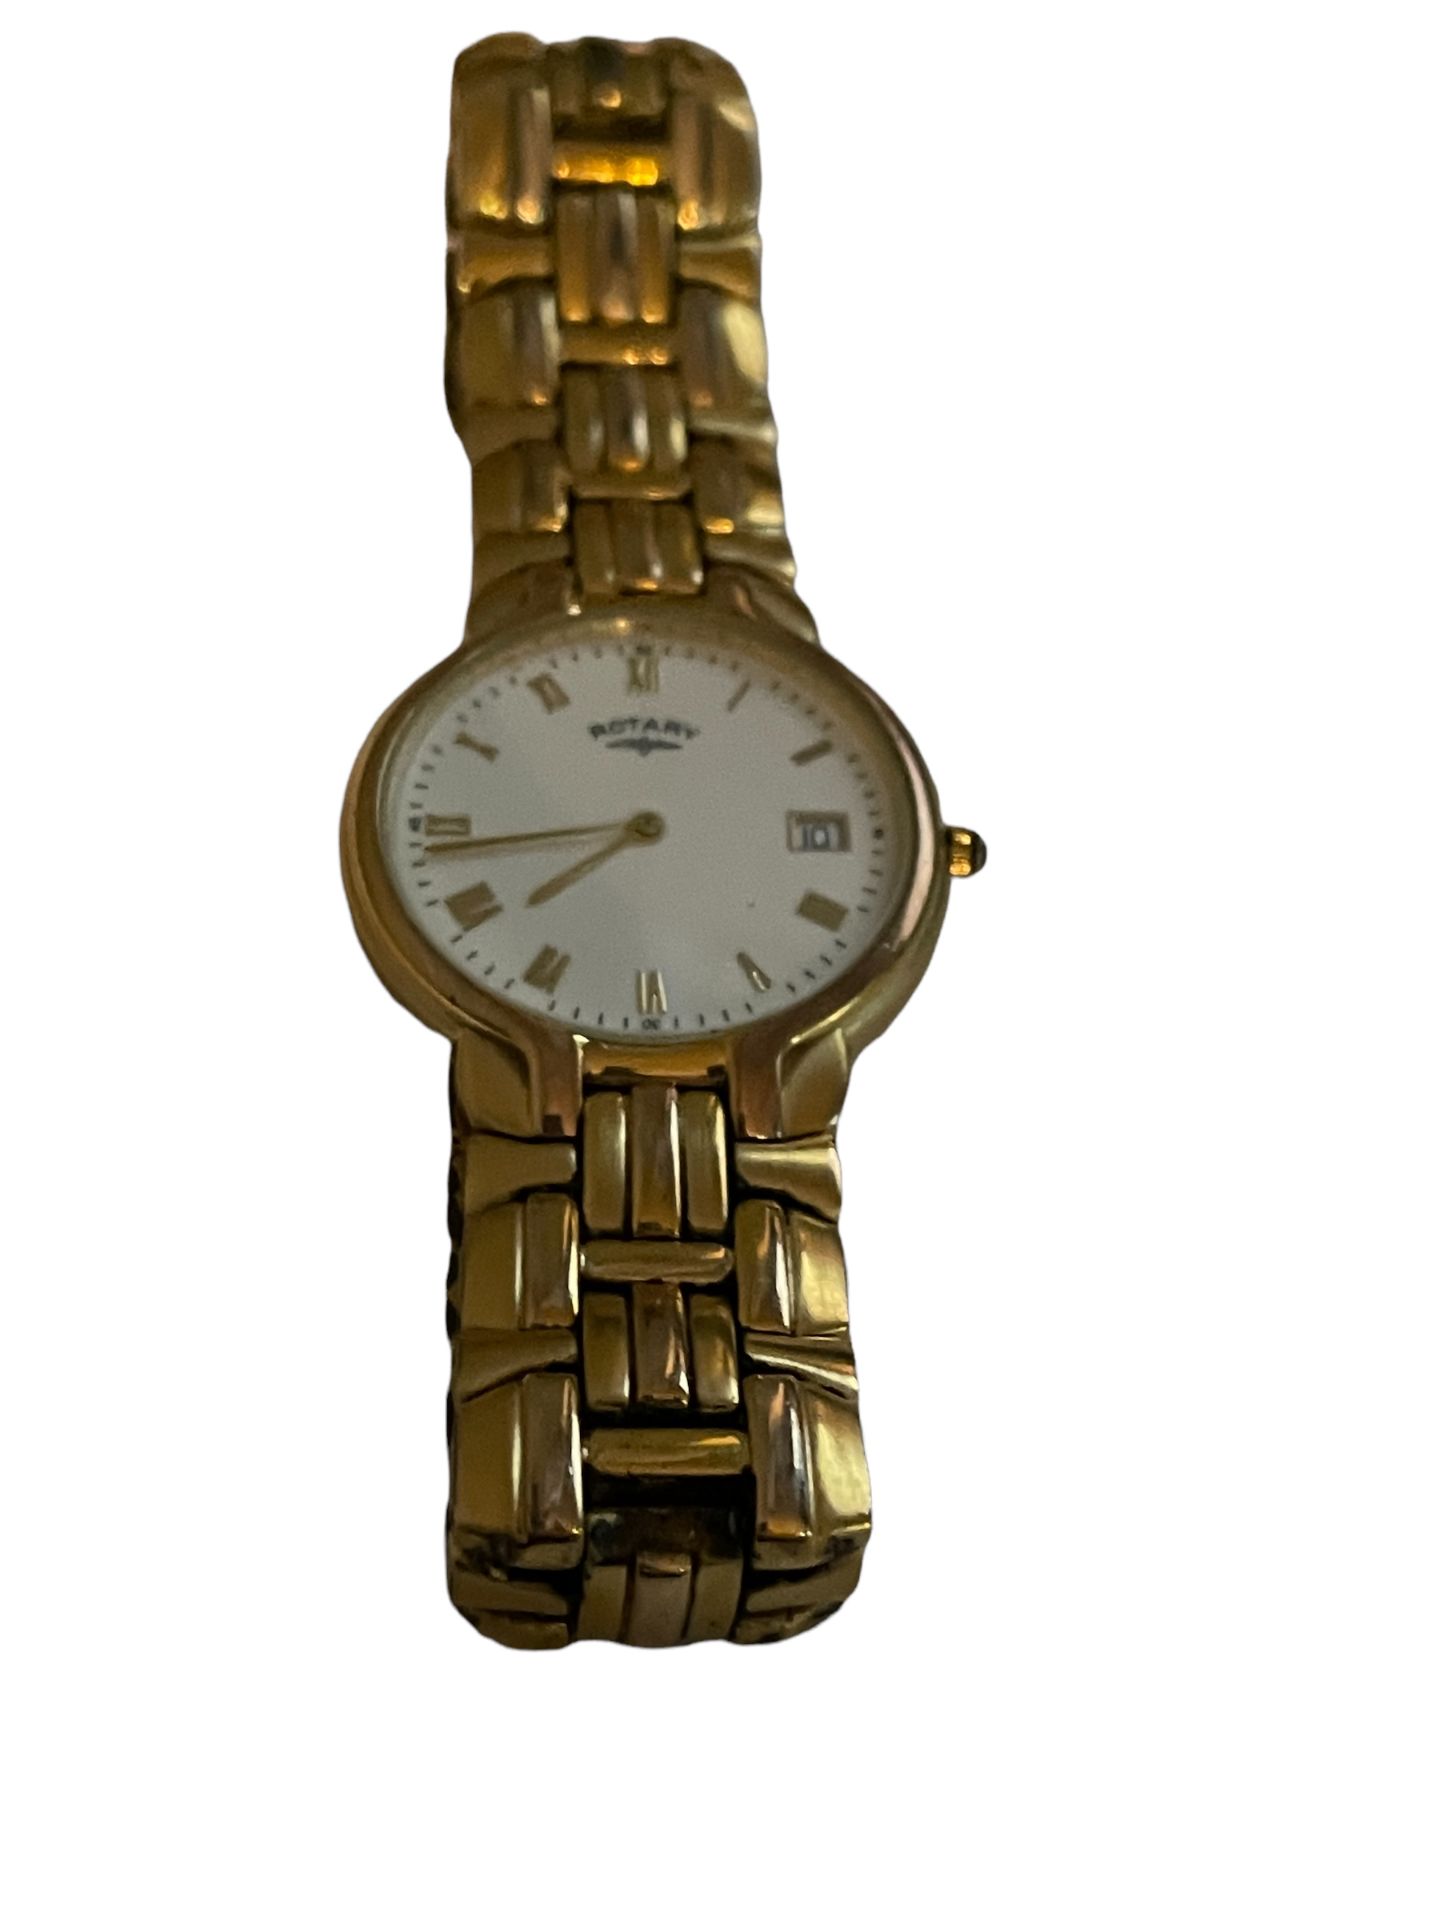 Mens Rotary Gold Plated Watch - Return Stock from our Private Jet Charter - Image 12 of 14